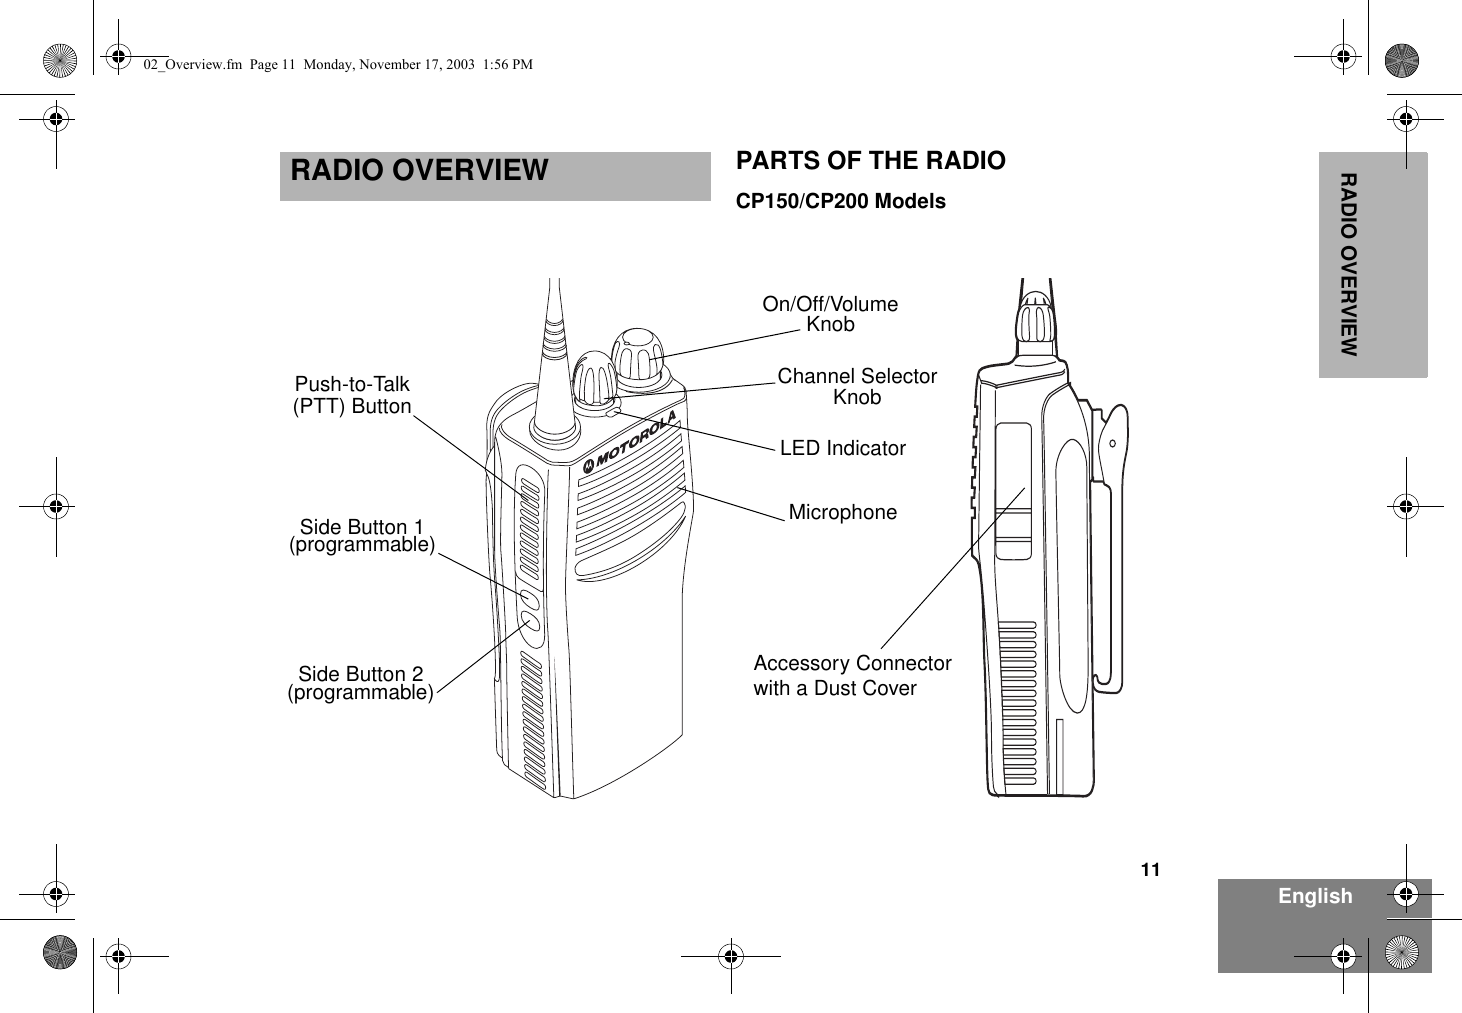 11EnglishRADIO OVERVIEWRADIO OVERVIEW PARTS OF THE RADIOCP150/CP200 Models(programmable)Side Button 1Push-to-Talk(PTT) Button(programmable)Side Button 2 Accessory Connectorwith a Dust CoverLED IndicatorOn/Off/VolumeKnobChannel SelectorKnobMicrophone02_Overview.fm  Page 11  Monday, November 17, 2003  1:56 PM